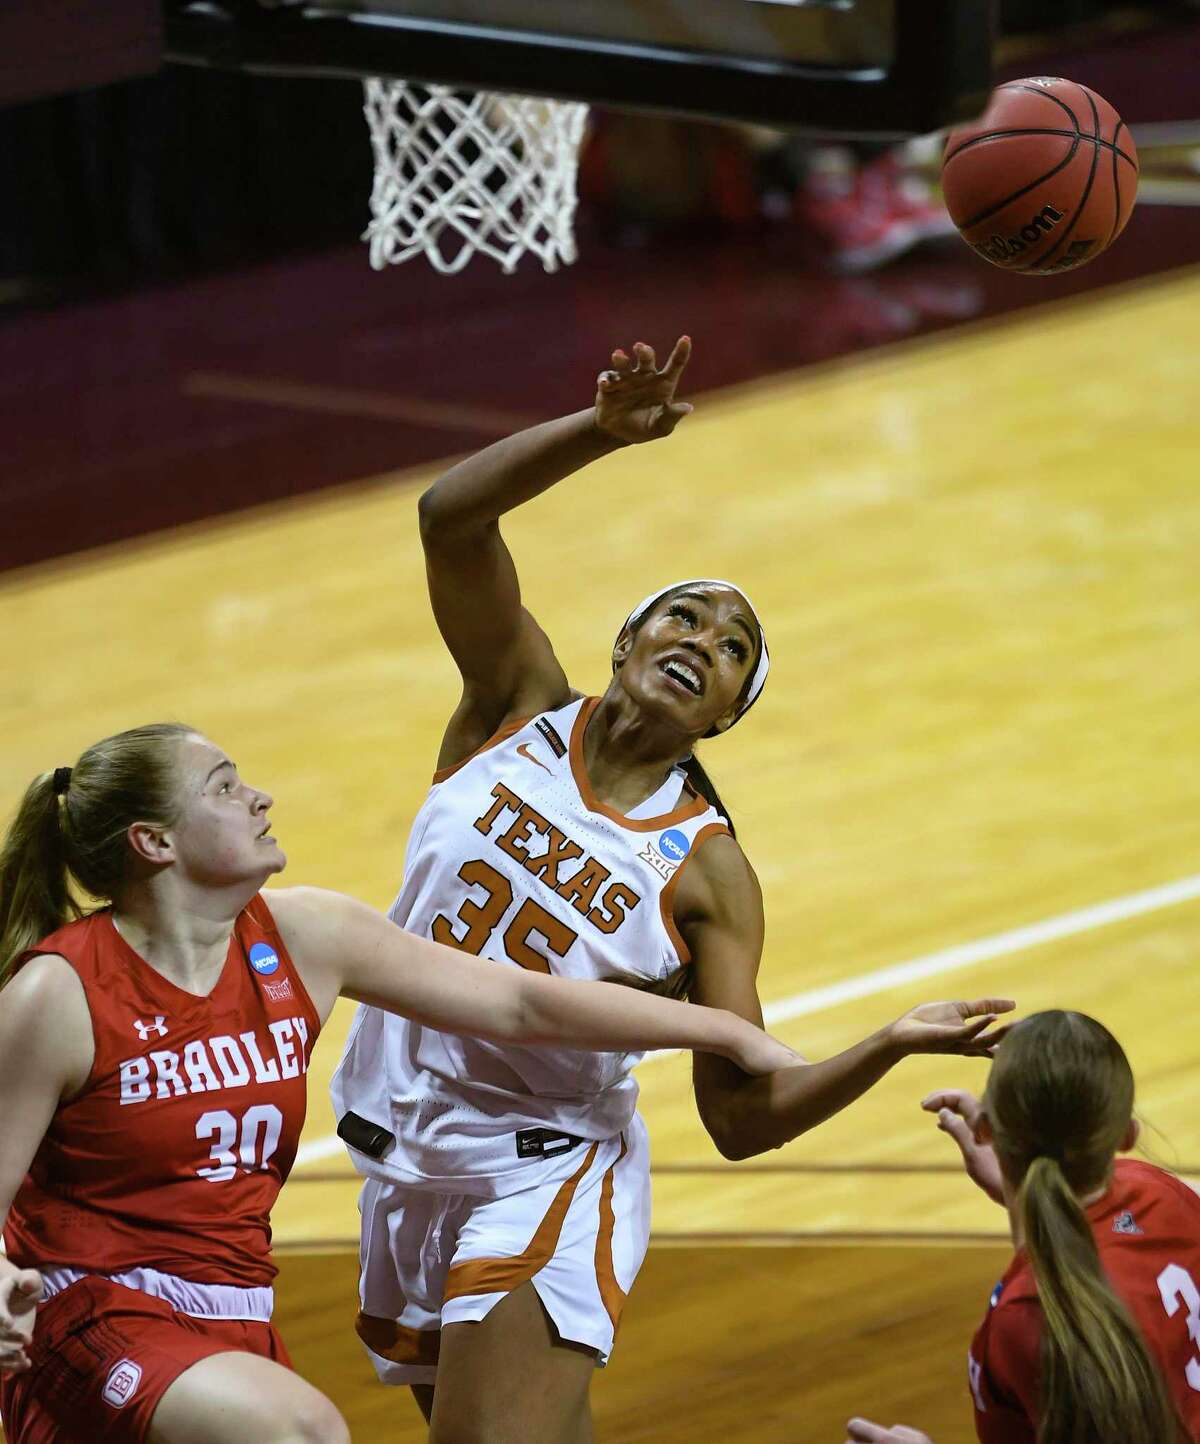 Texas center Charli Collier (35) battles Emily March (30) and Gabi Haack (3) of Bradley for a rebound during the first round of the NCAA Division I Women's Basketball Tournament in San Marcos on Monday, March 22, 2021.